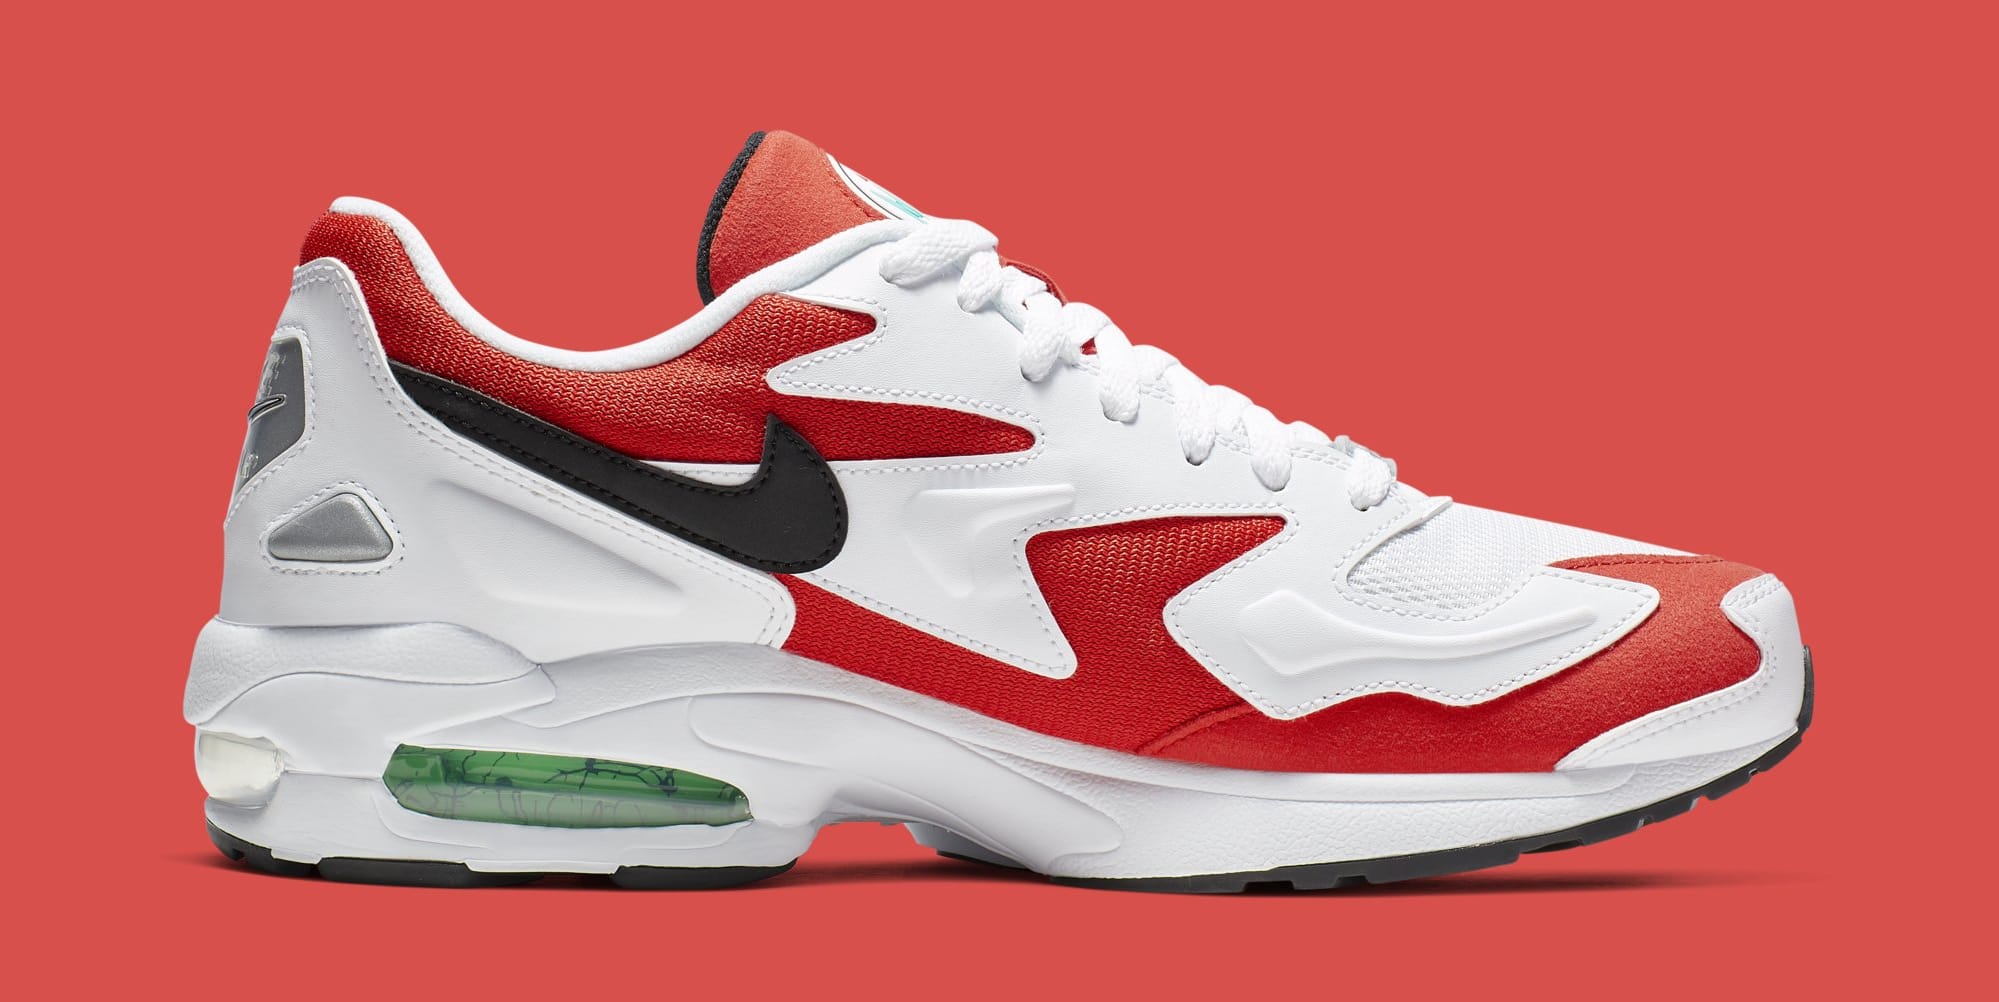 Nike Air Max2 Light &#x27;White/Black-Habanero Red-Cool Grey&#x27; AO1741-101 (Medial)